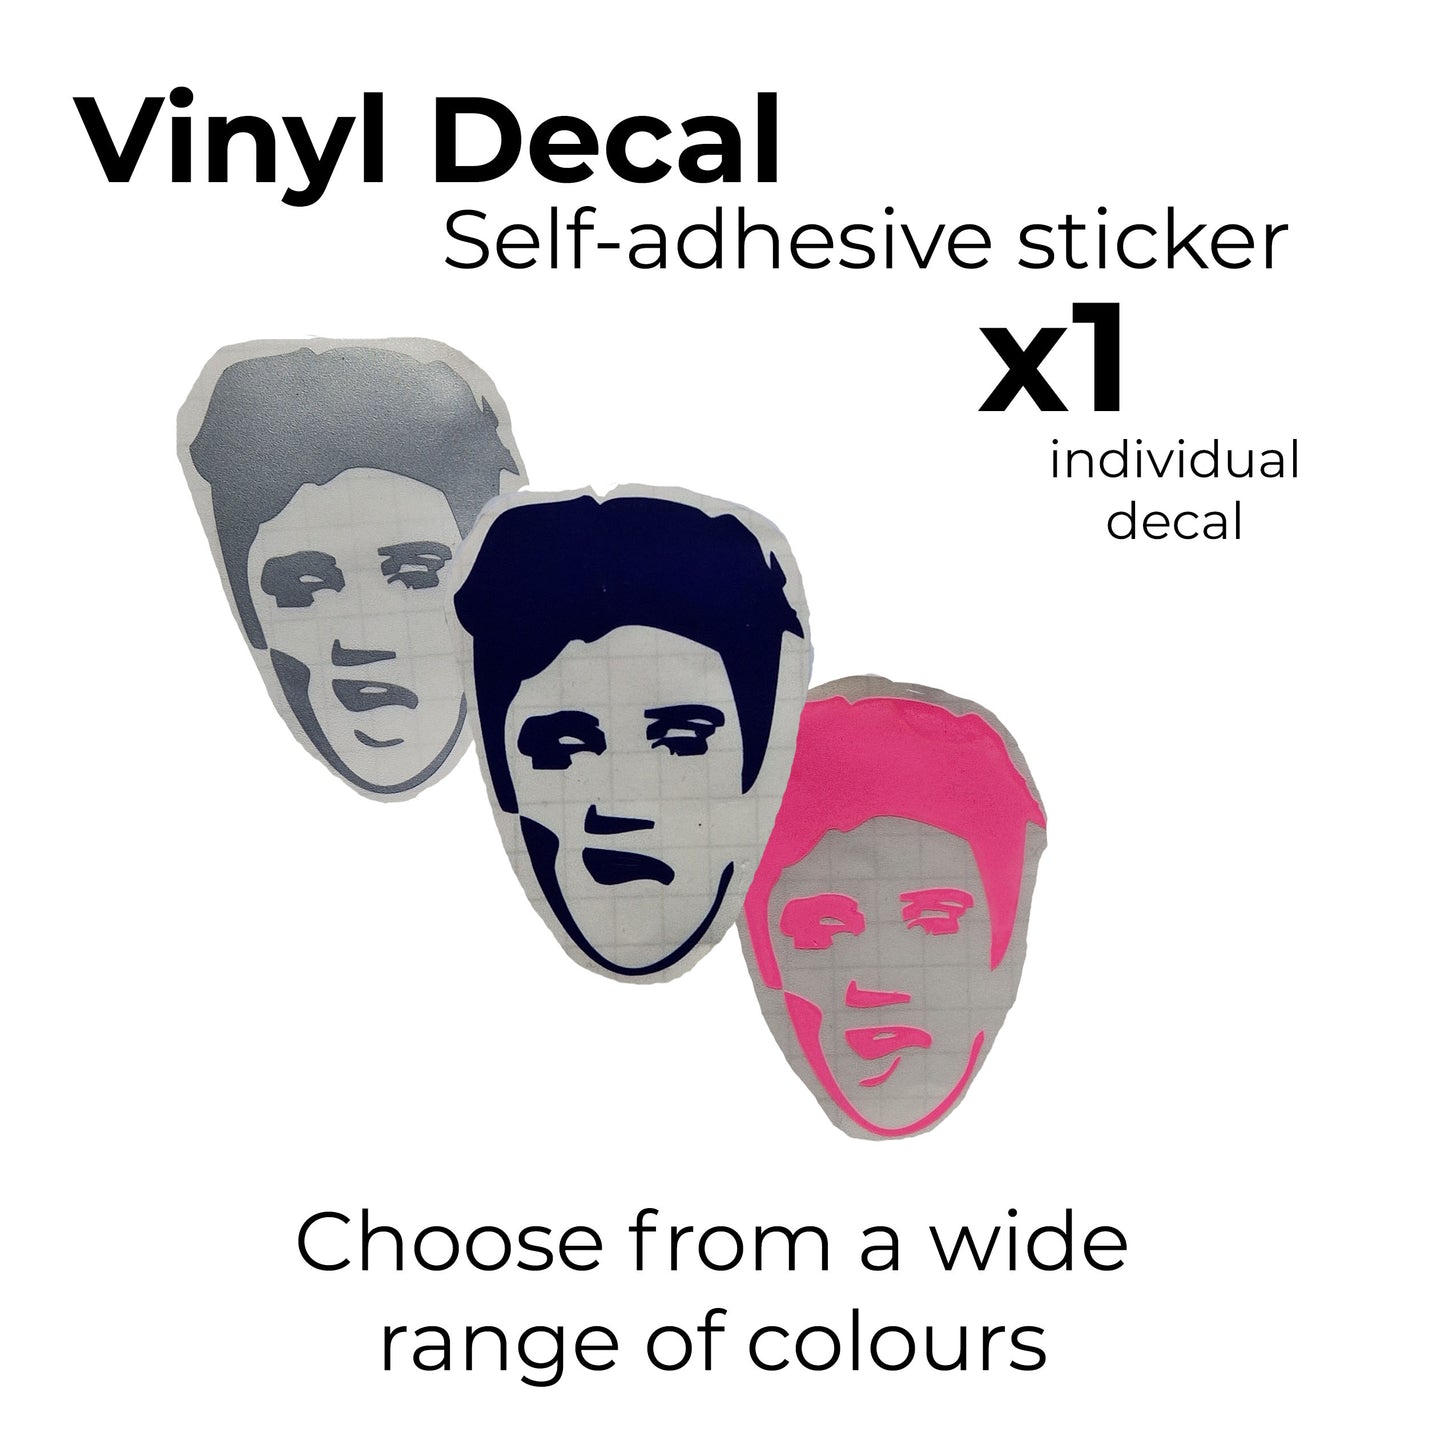 elvis presley decal rock band stickers 1x music sticker in a choice of colour